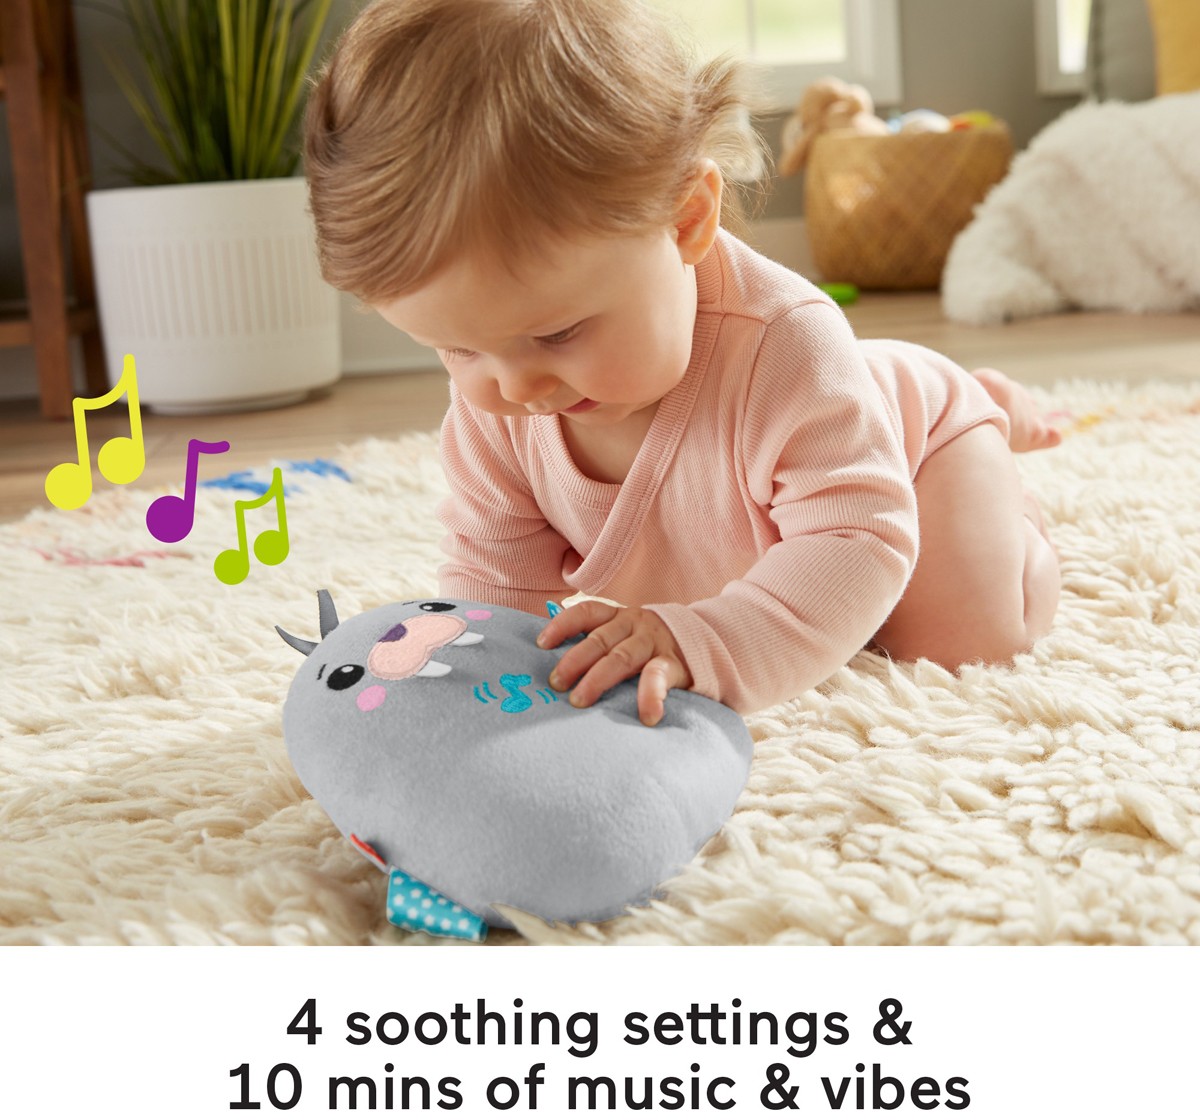 Fisher-Price Chill Vibes Walrus Soother, Take-Along Musical Plush Toy With Calming Vibrations For Infants, 0Y+, Grey